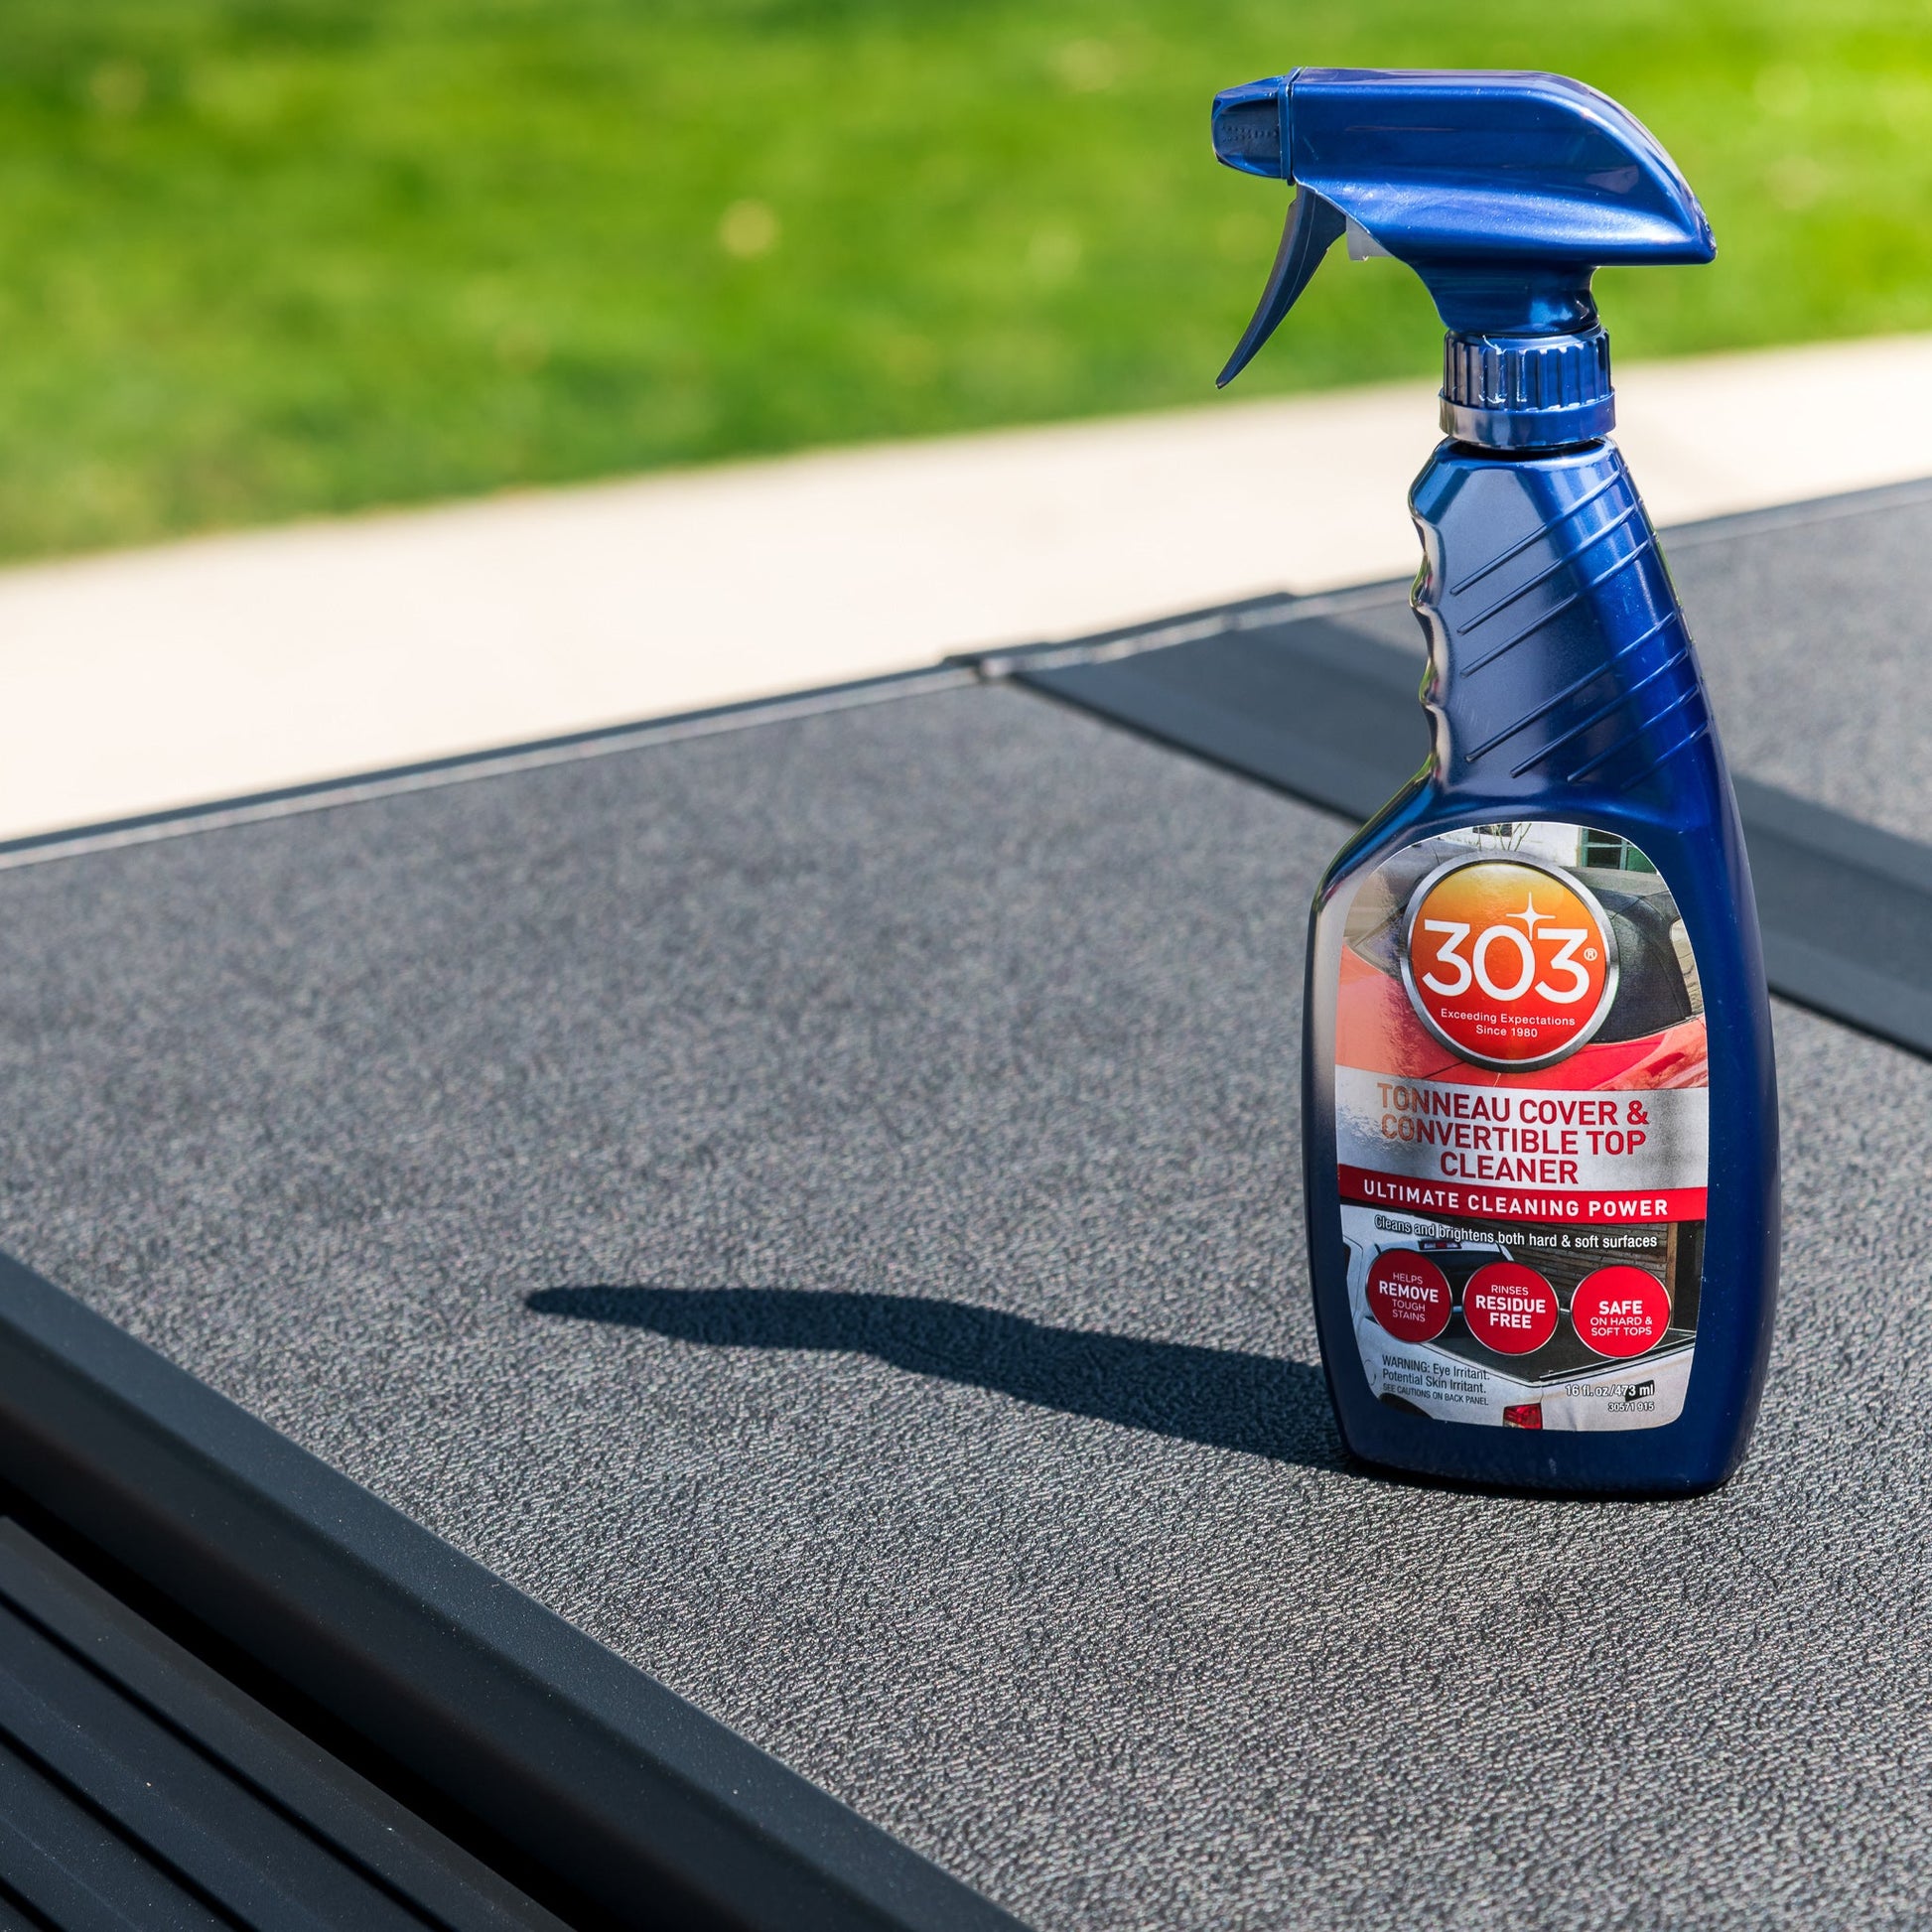 303 30571 Tonneau Cover and Convertible Top Cleaner 16 oz.